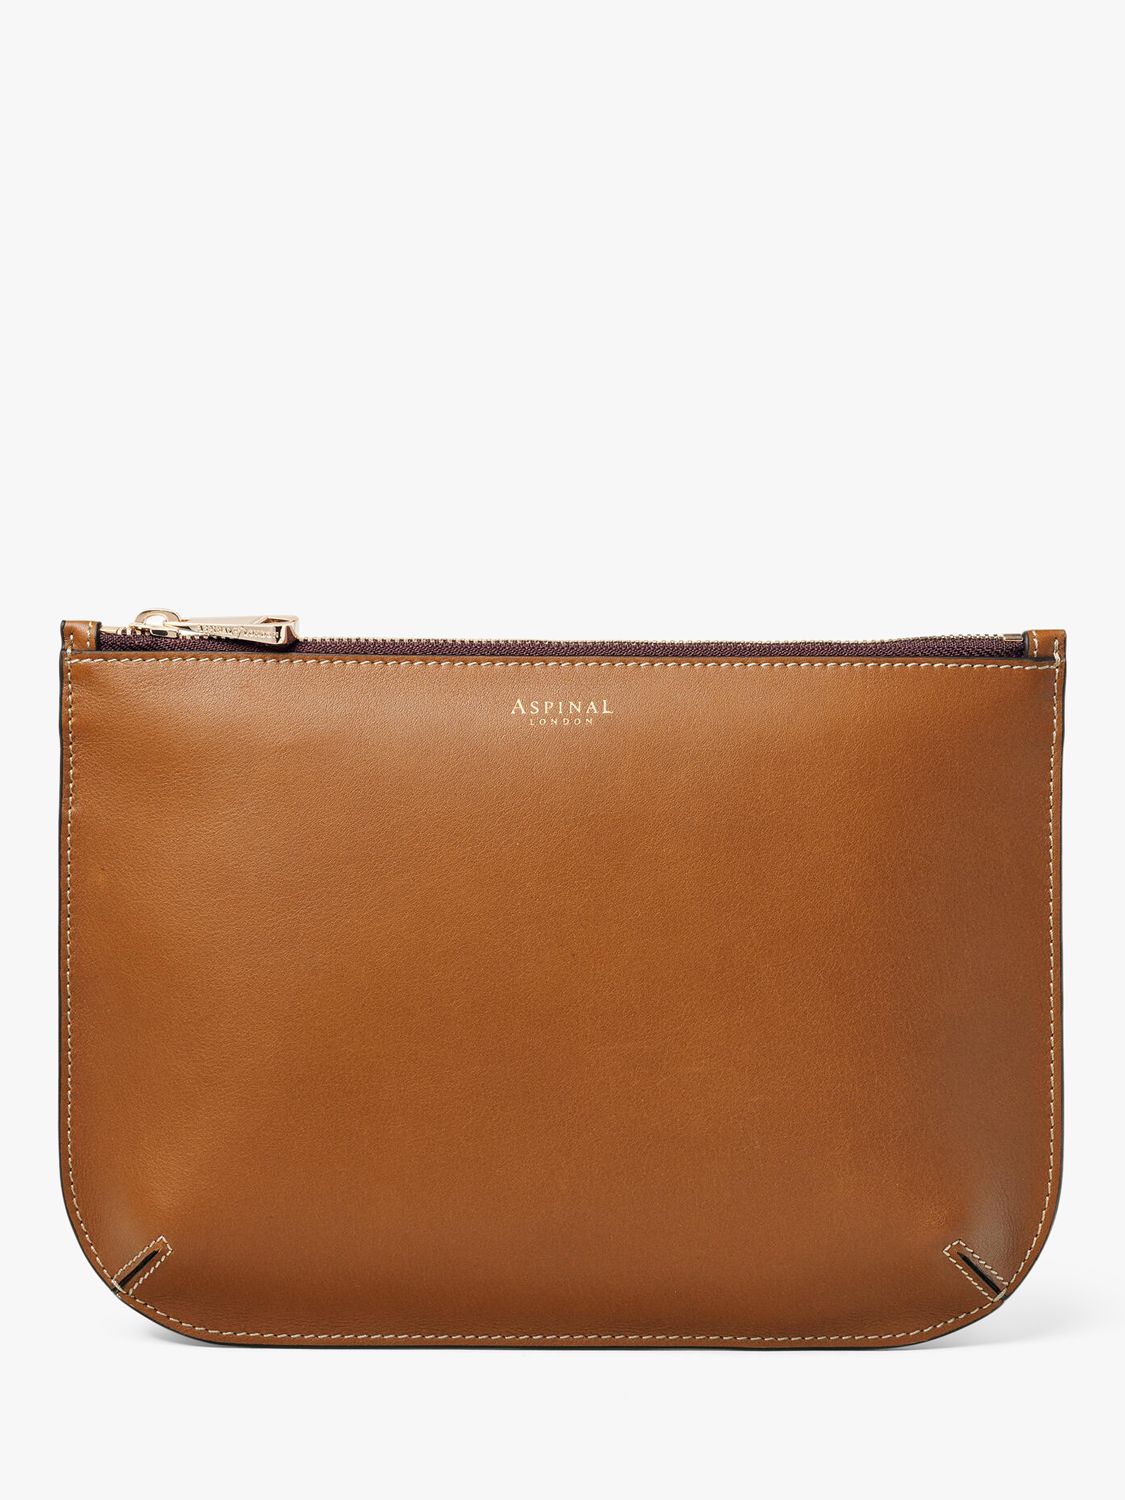 Aspinal of London Large Ella Smooth Leather Pouch, Tan